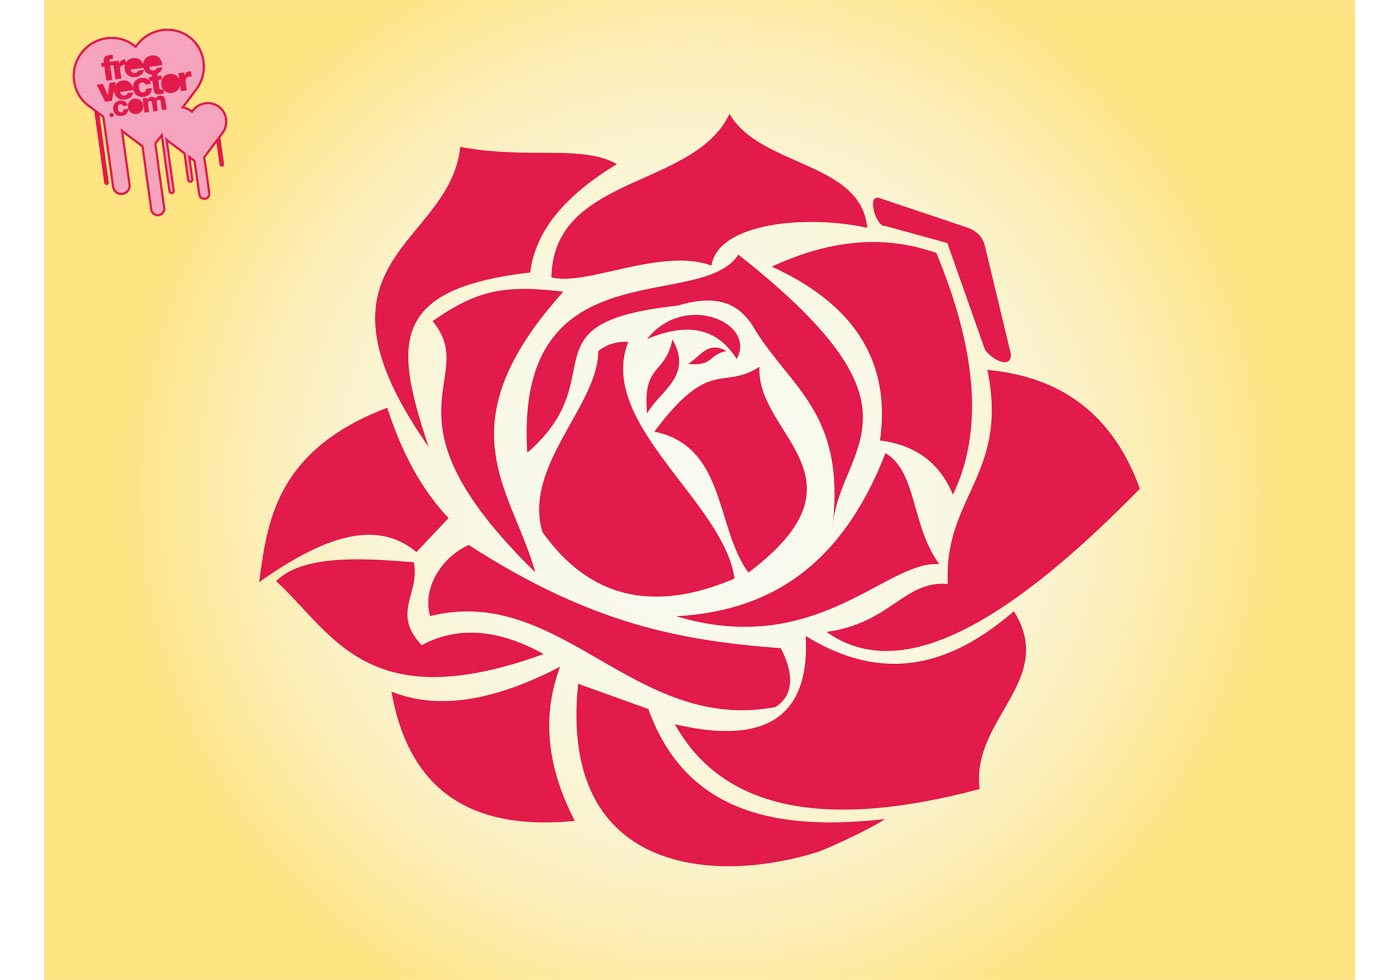 Download Rose Blossom Graphics - Download Free Vector Art, Stock ...